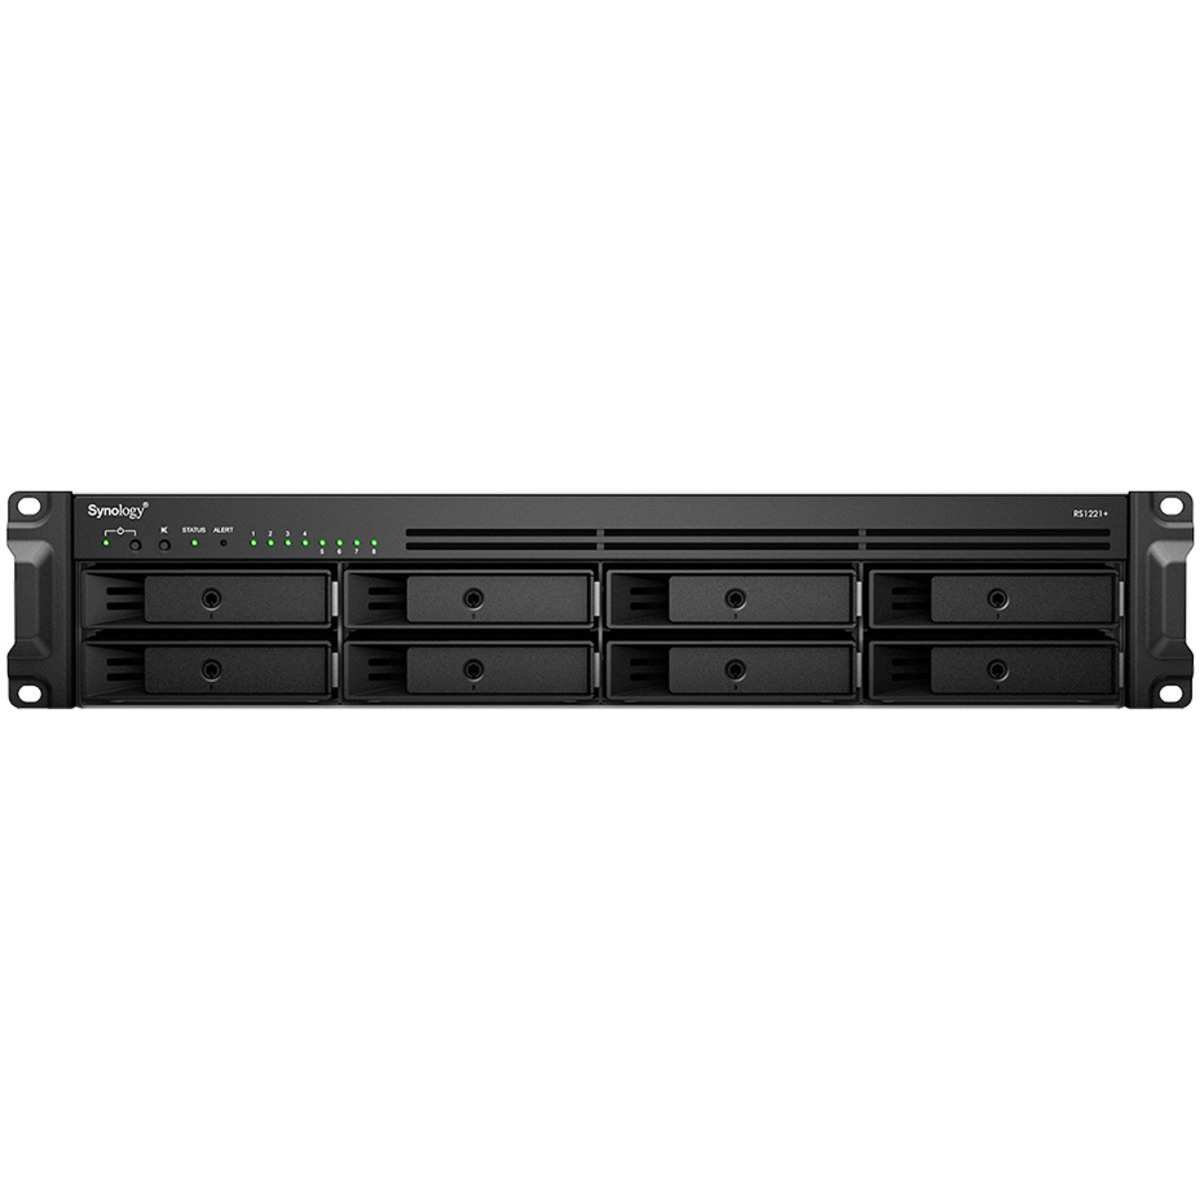 buy $4675 Synology RackStation RS1221RP+ 128tb RackMount NAS - Network Attached Storage Device 8x16000gb Toshiba Enterprise Capacity MG08ACA16TE 3.5 7200rpm SATA 6Gb/s HDD ENTERPRISE Class Drives Installed - Burn-In Tested - nas headquarters buy network attached storage server device das new raid-5 free shipping usa RackStation RS1221RP+